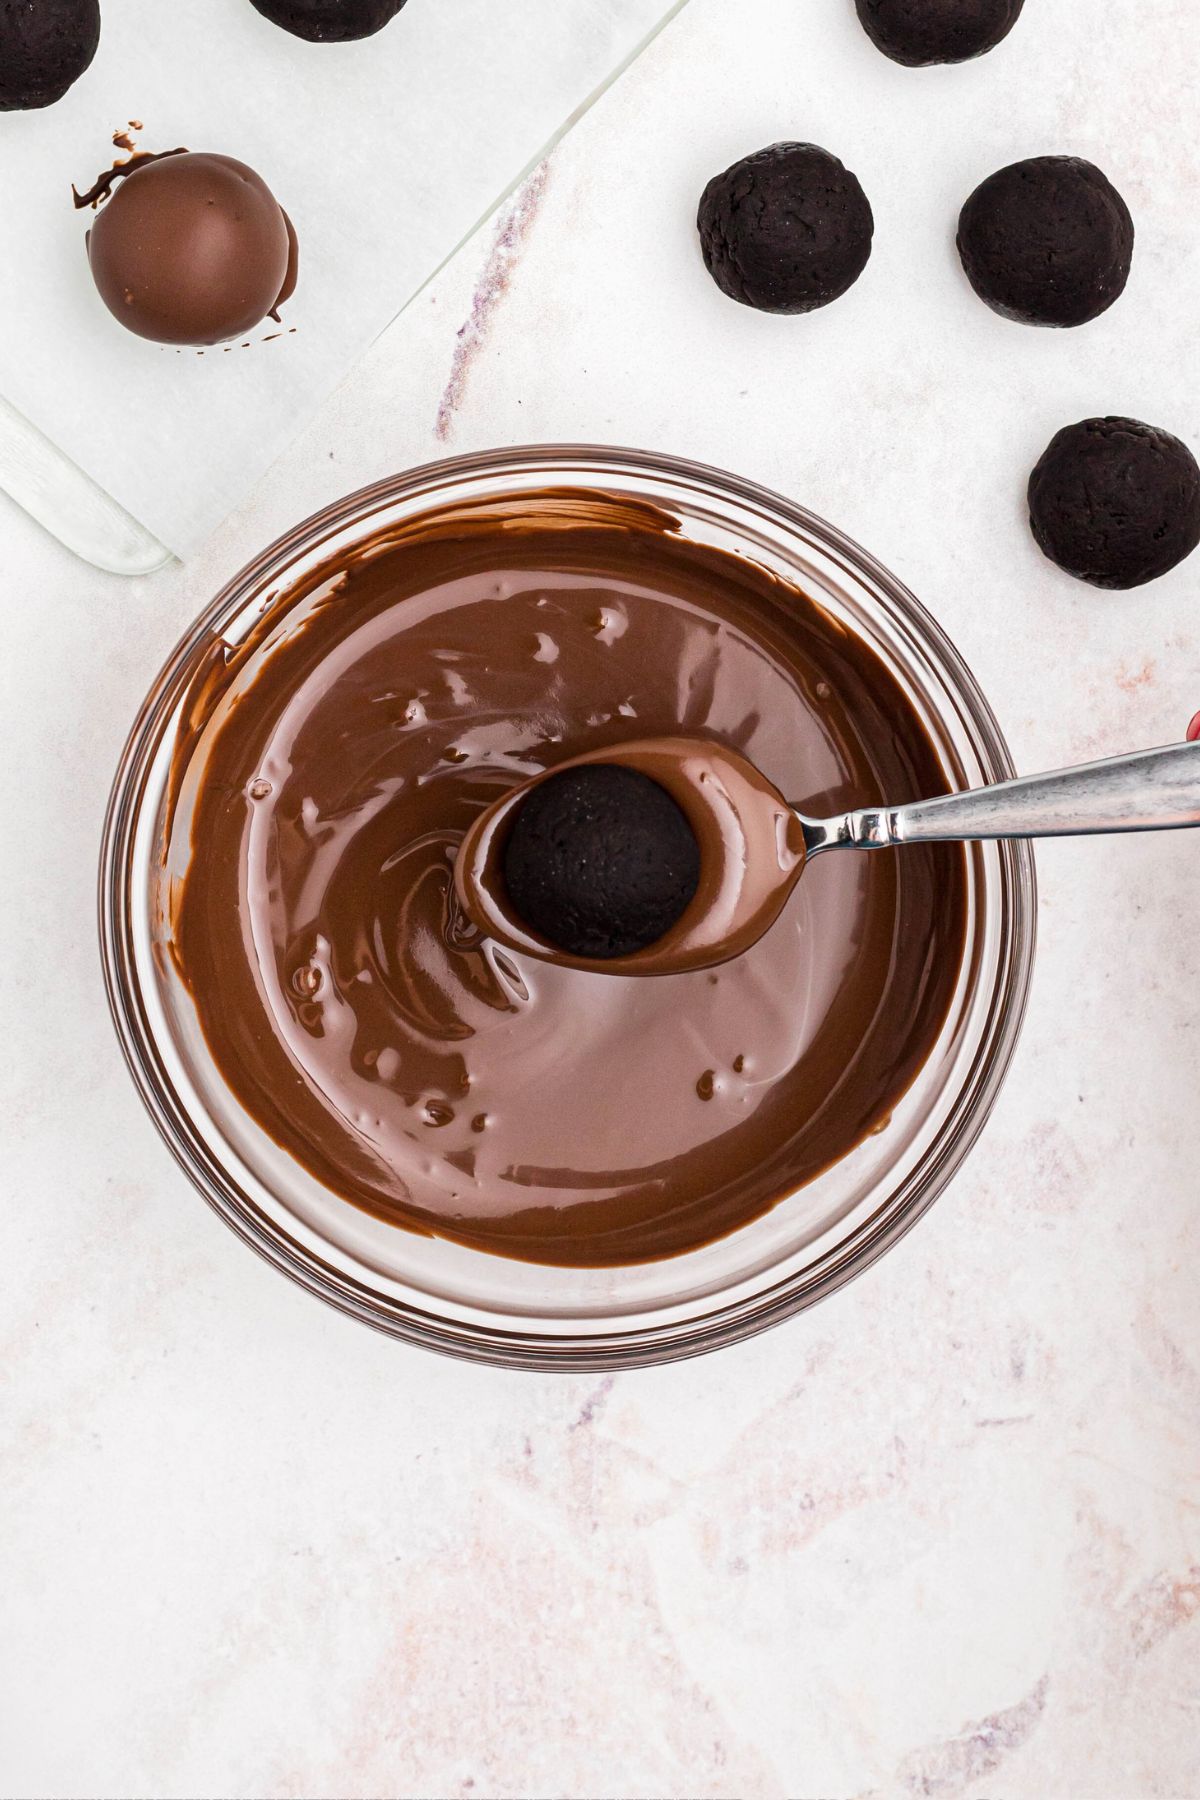 Oreo ball being dipped into melted chocolate in a clear glass bowl.